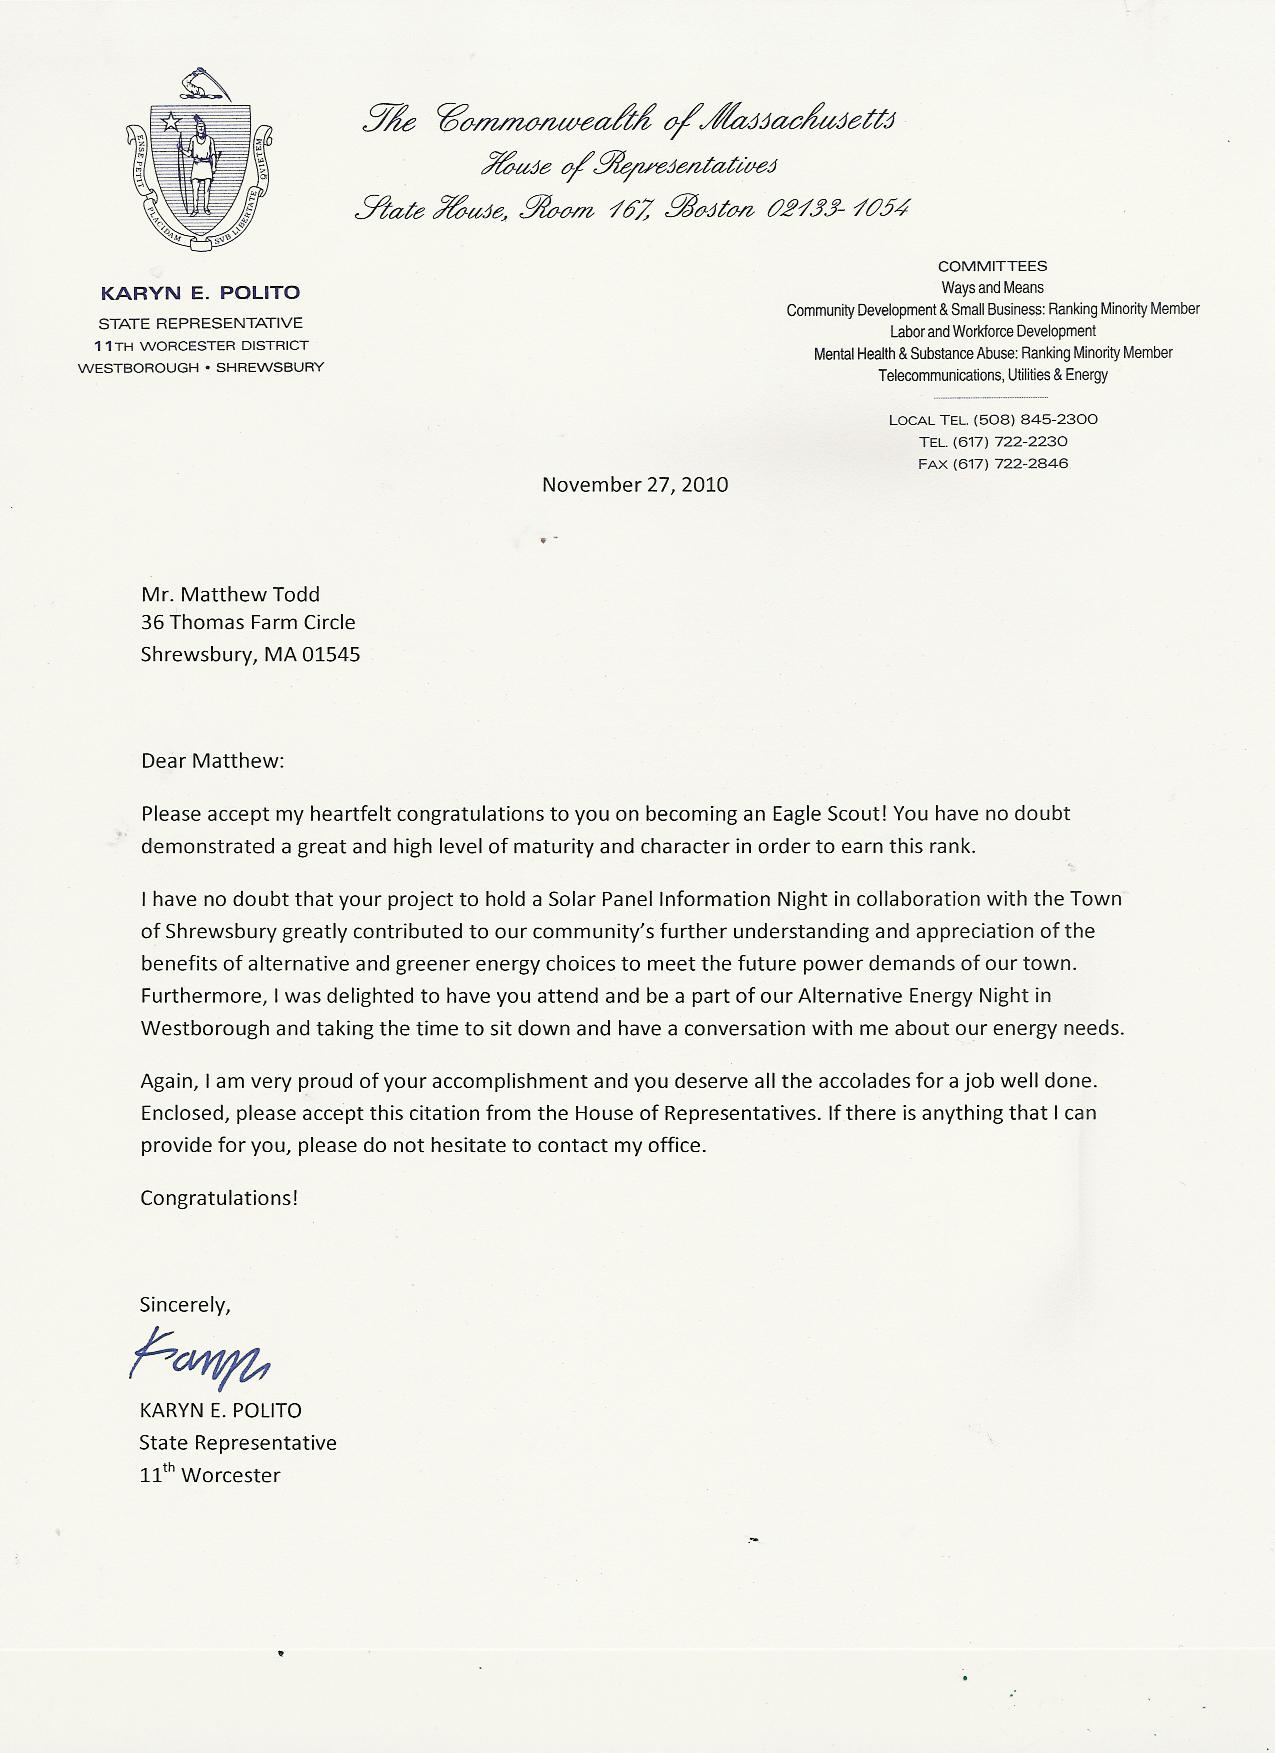 Sample Letter Of Recommendation For Eagle Scout Award